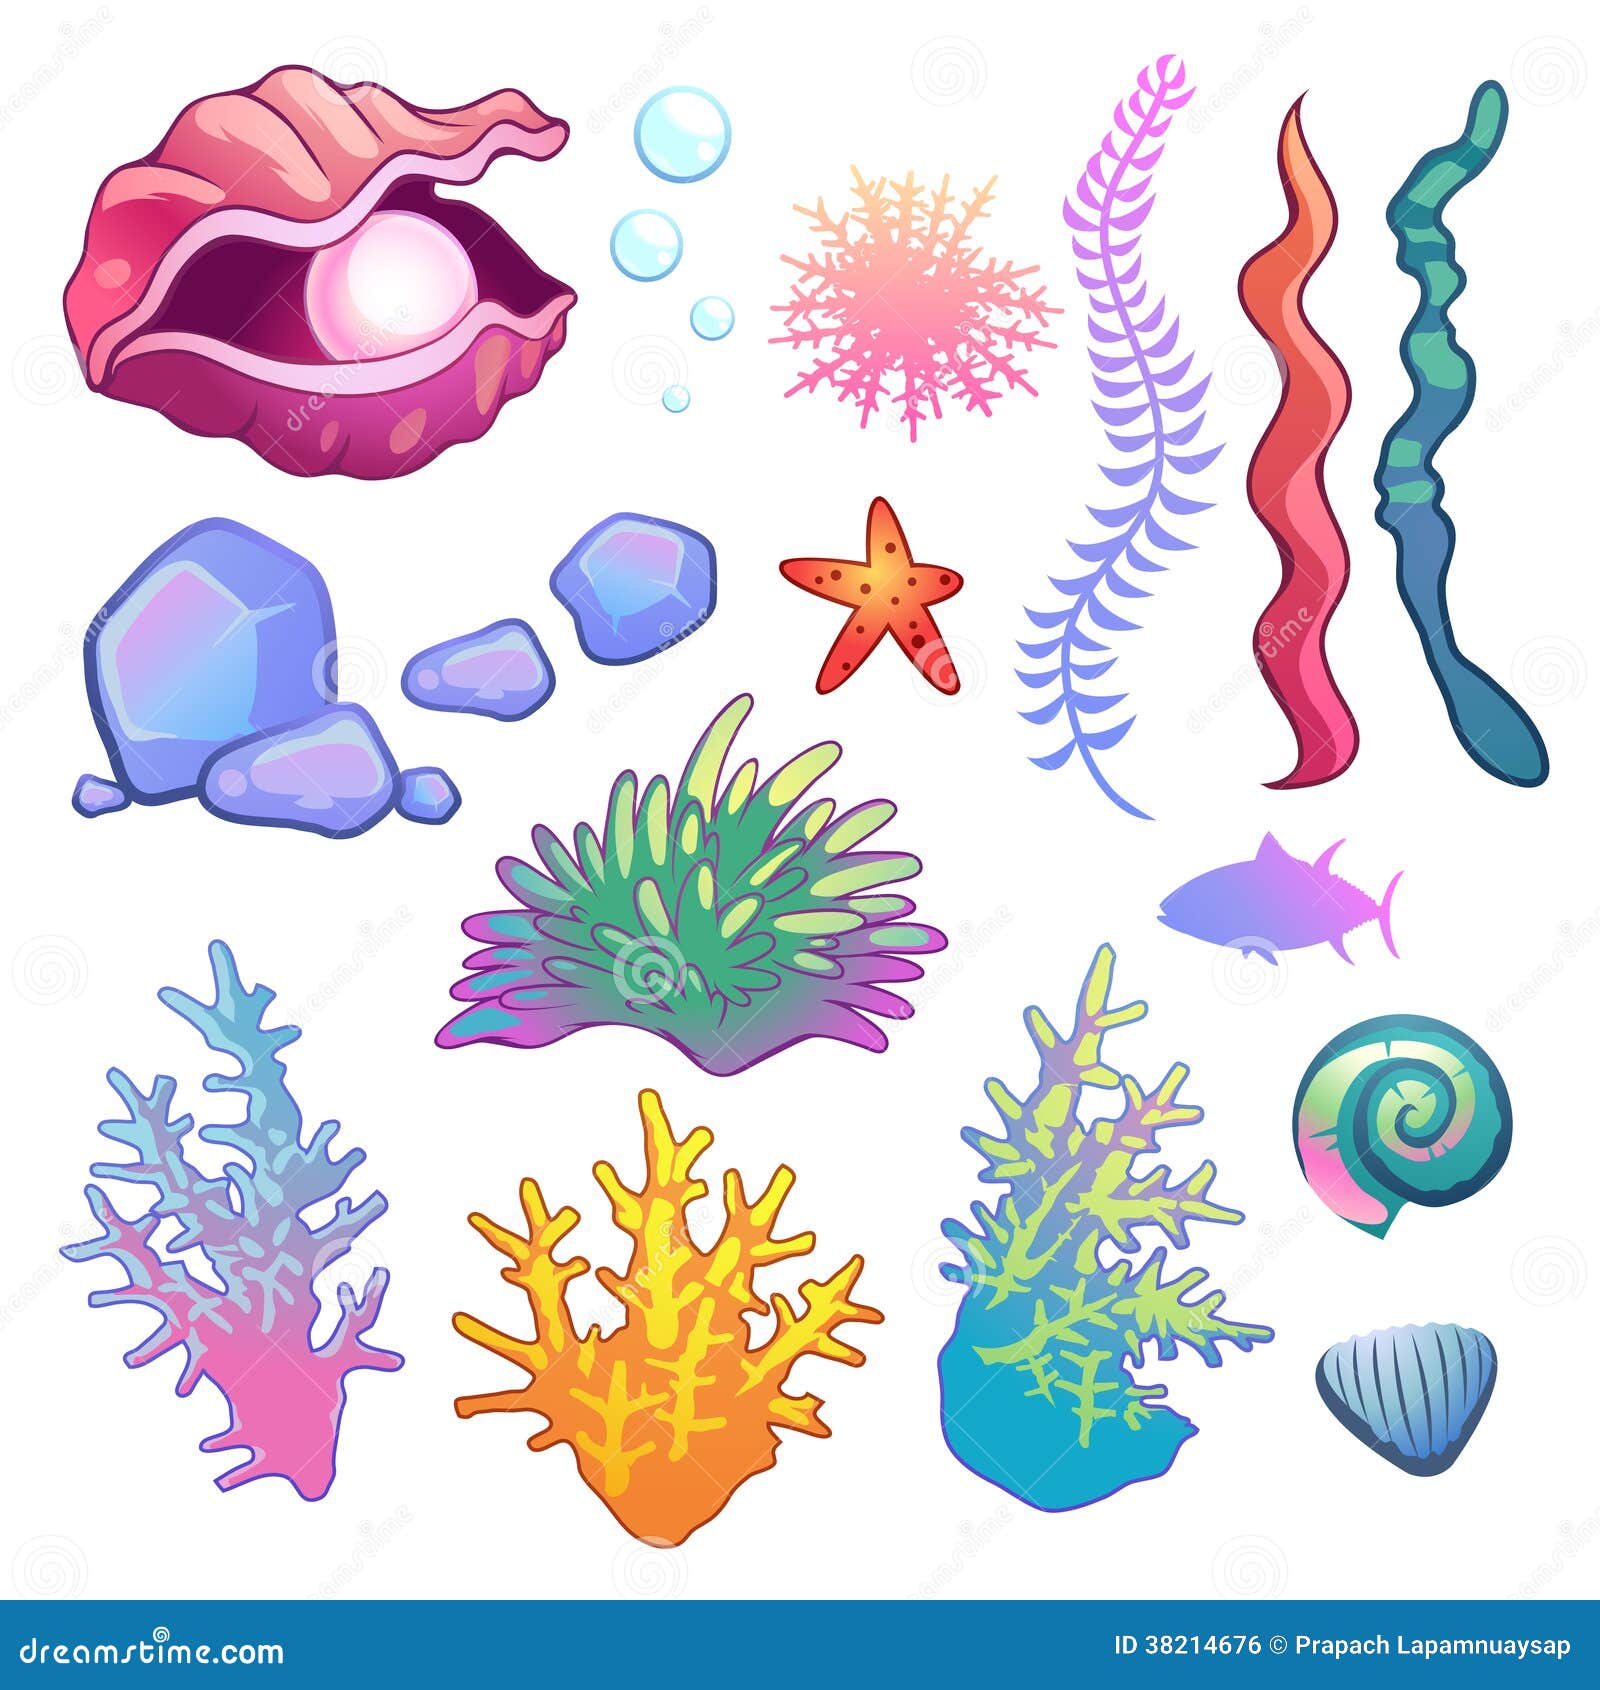 under the sea clipart free - photo #8